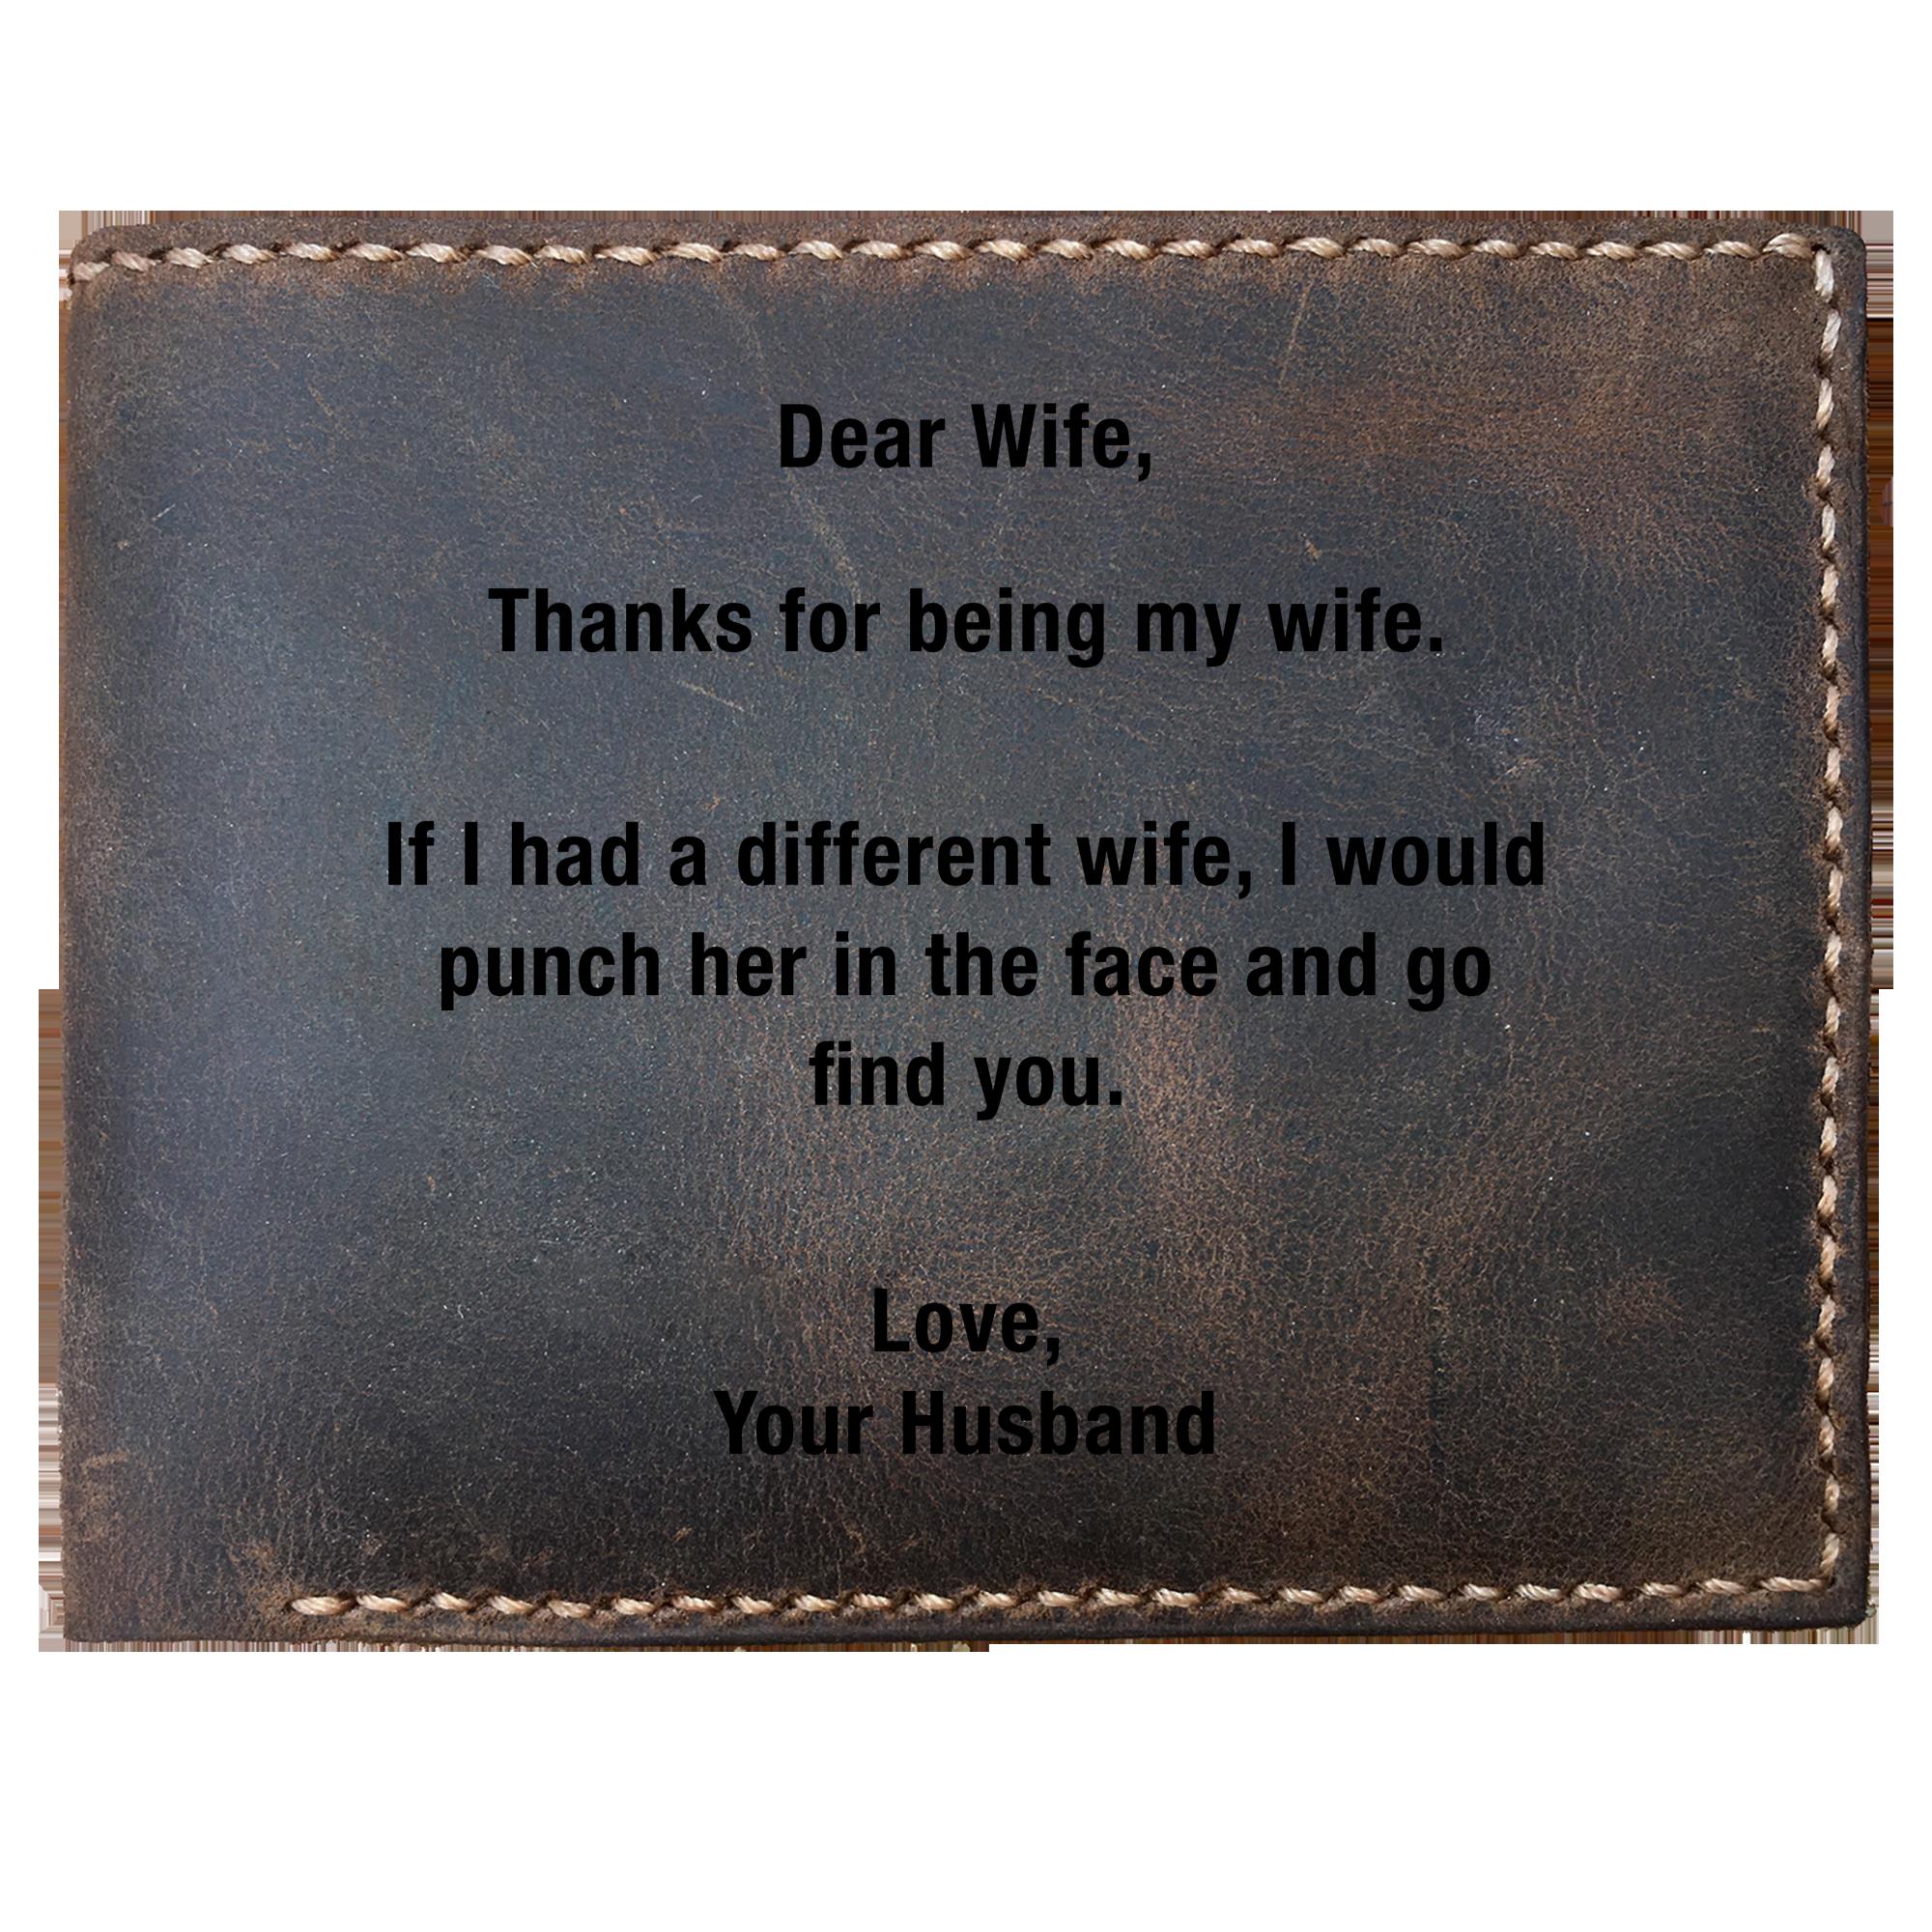 Skitongifts Funny Custom Laser Engraved Bifold Leather Wallet For Men, Thanks For Being My Wife From Husband